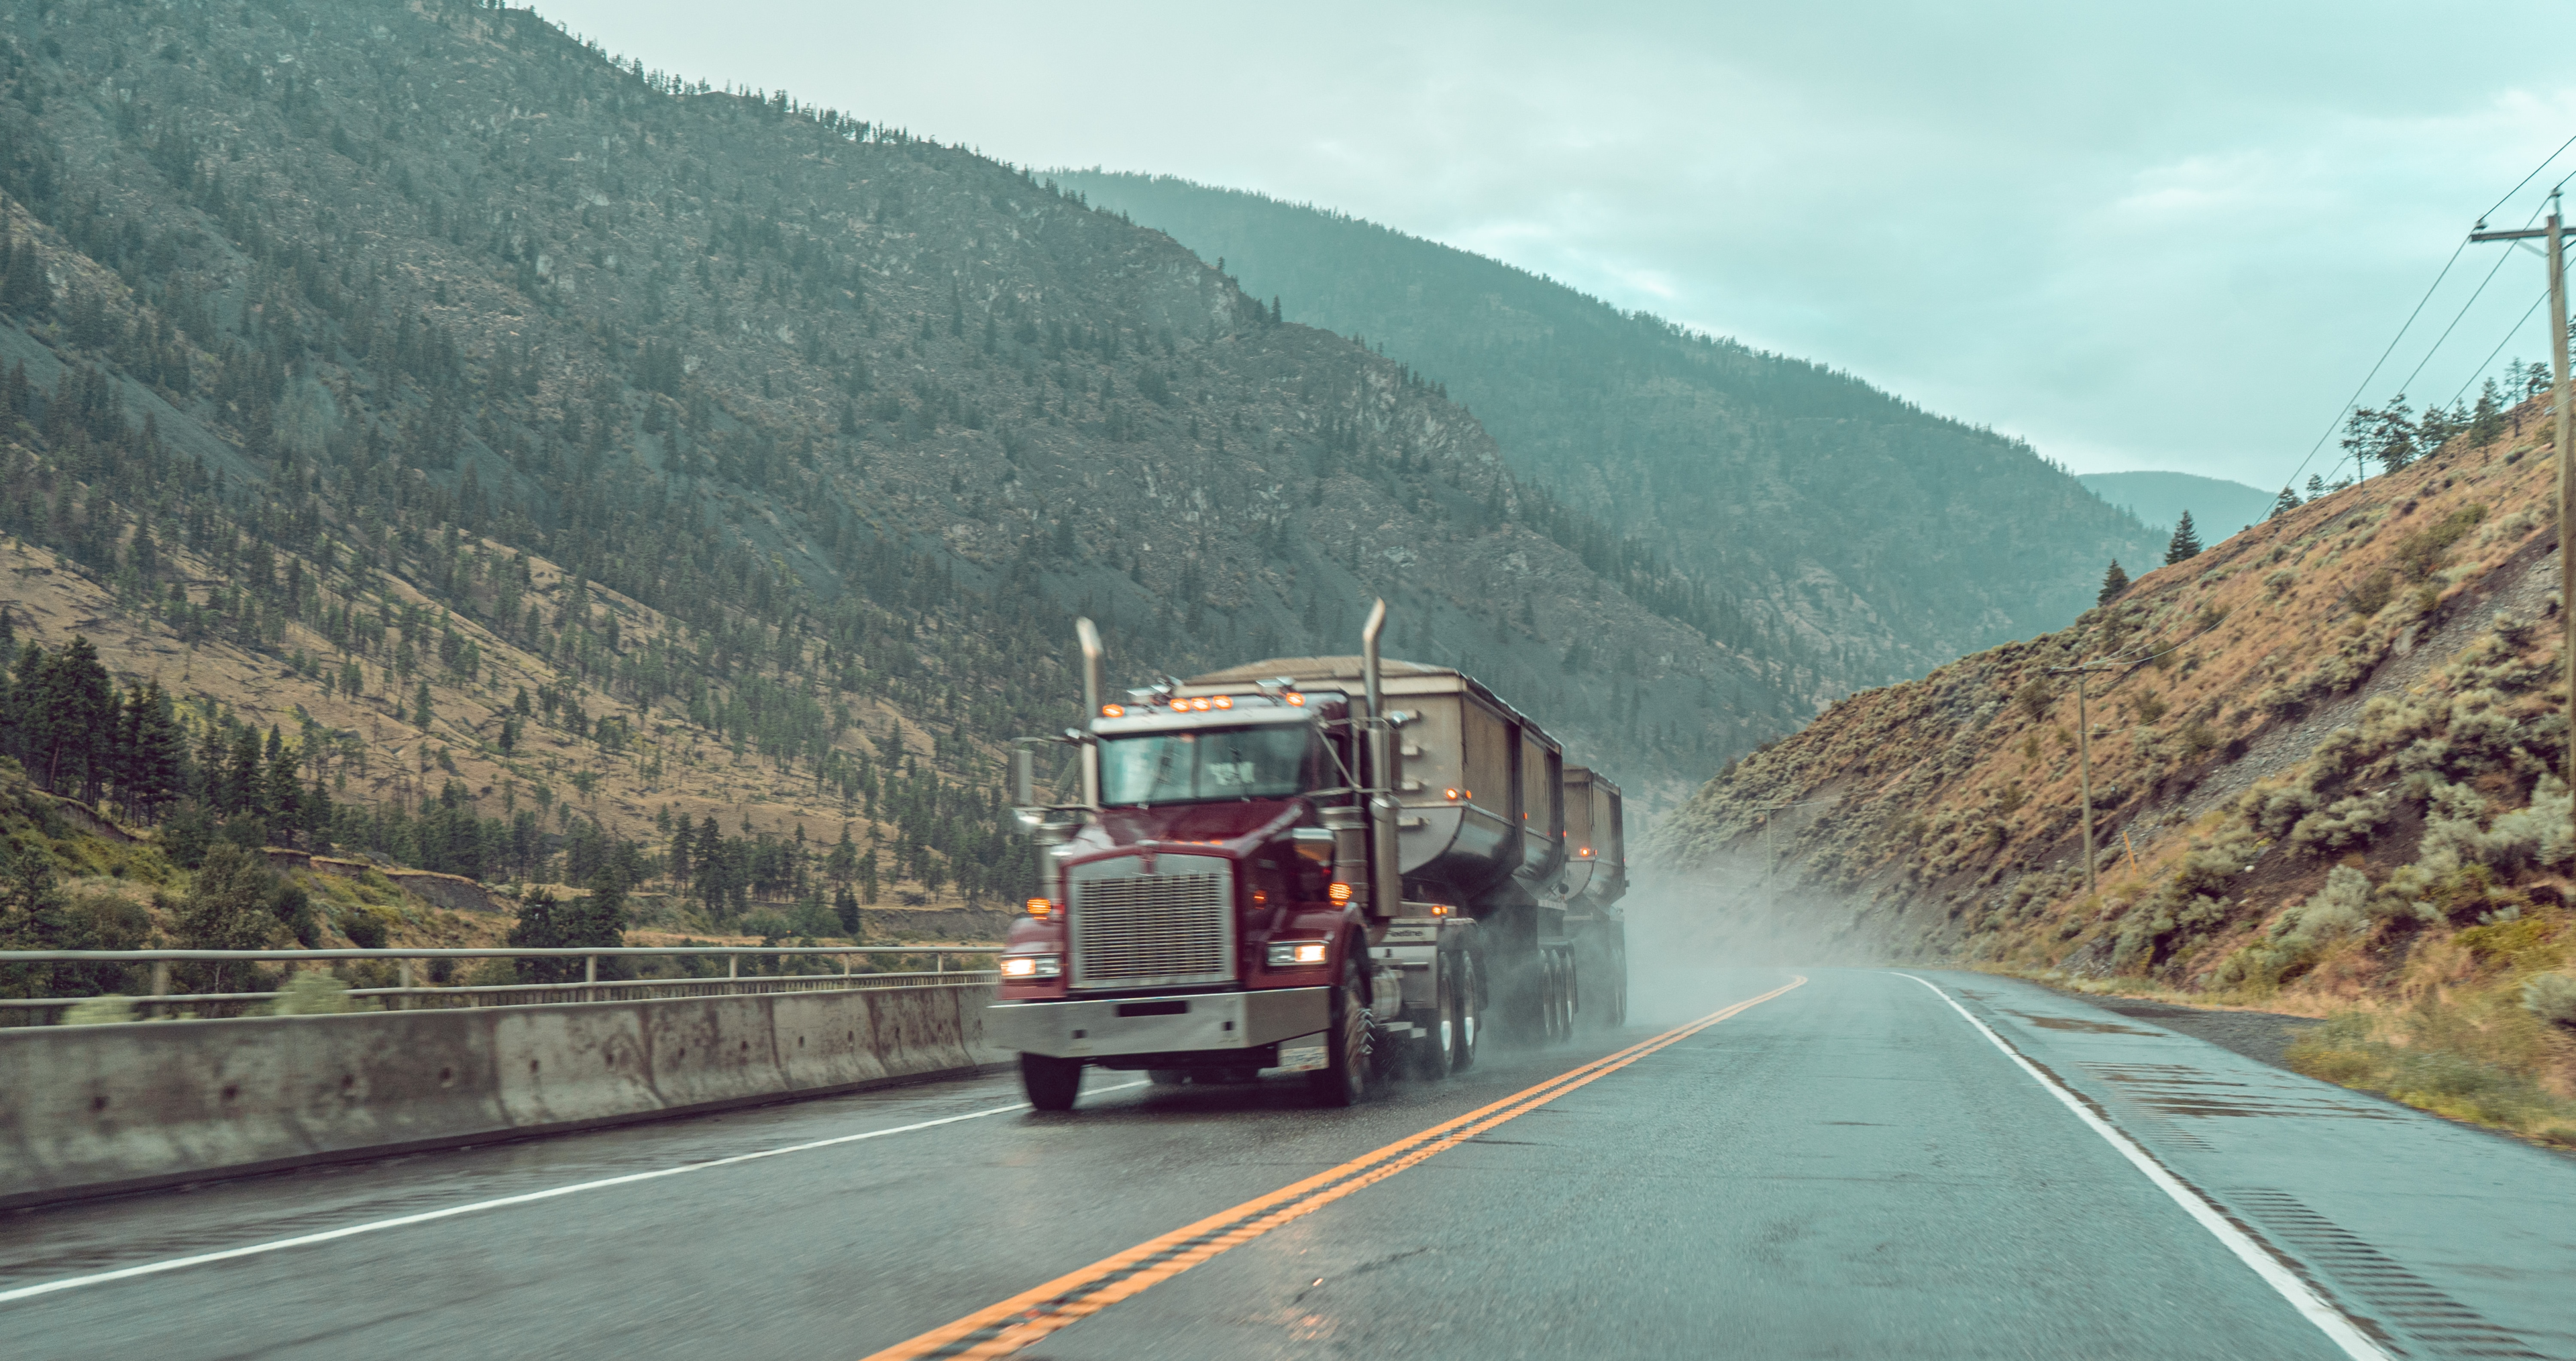 Commercial vehicle accidents can be especially serious.